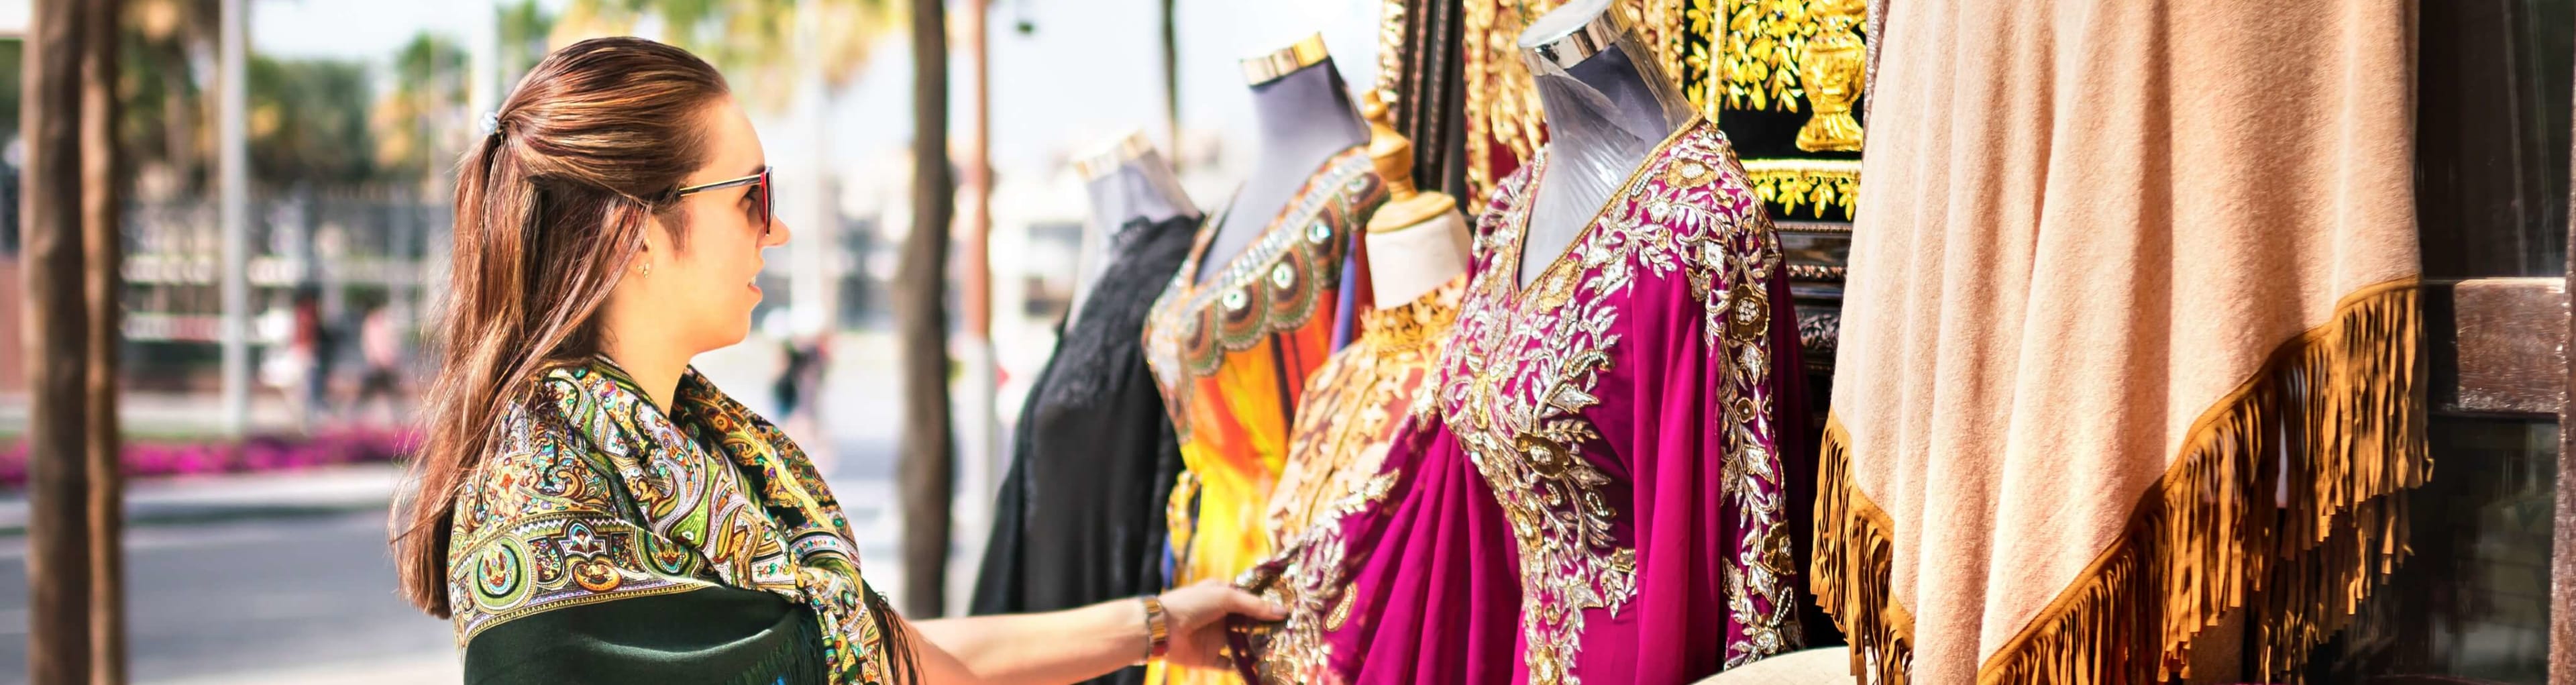 A woman shopping for clothes at a pop up market in Dubai